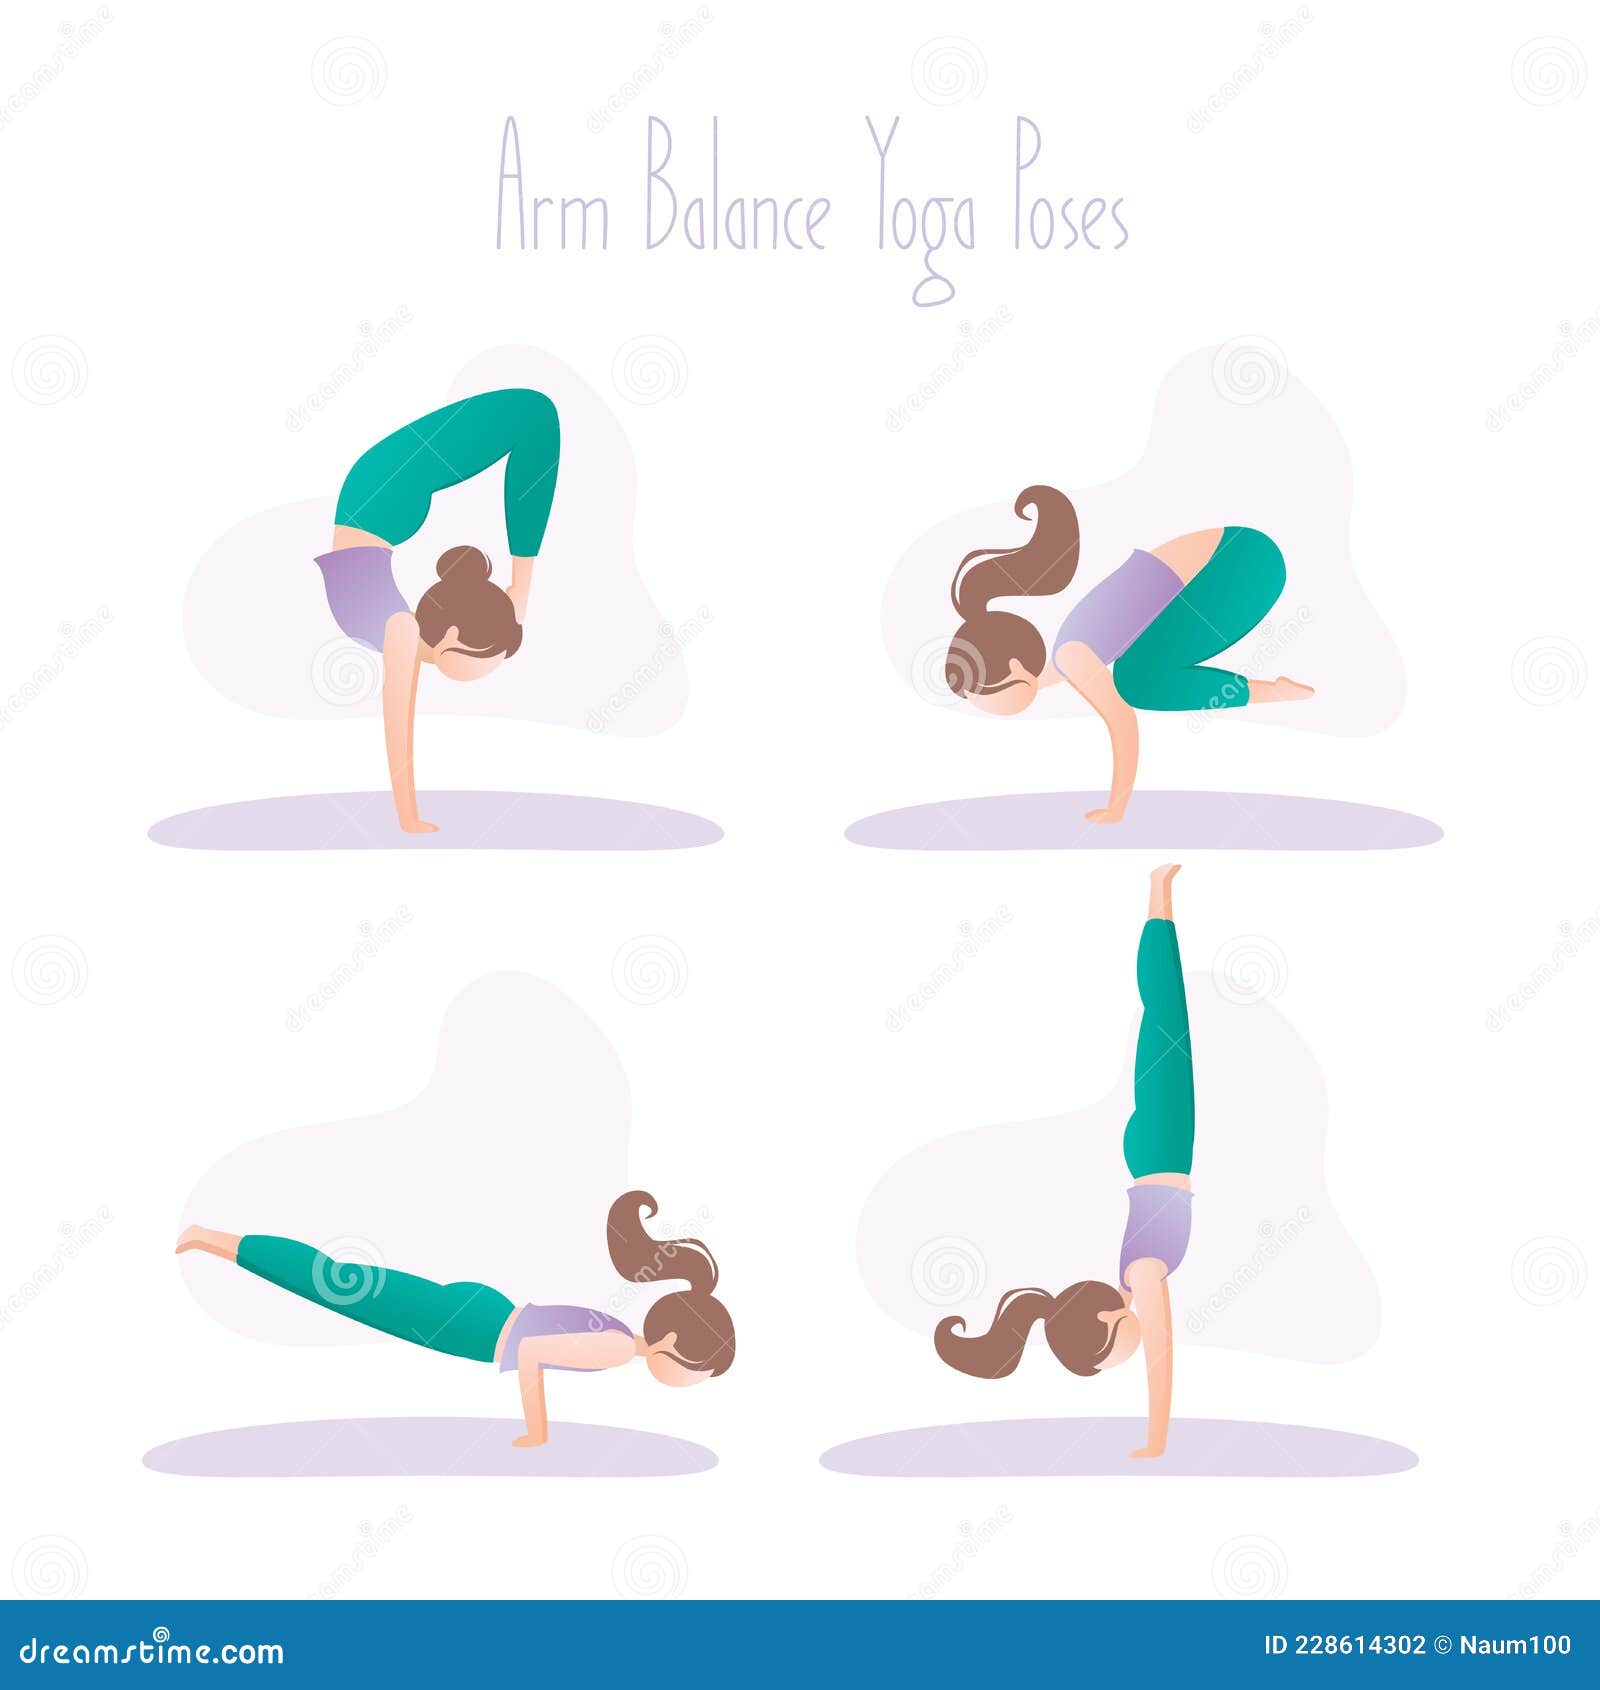 15 Yoga Poses and their Benefits to your Body 🧘‍♀️👍